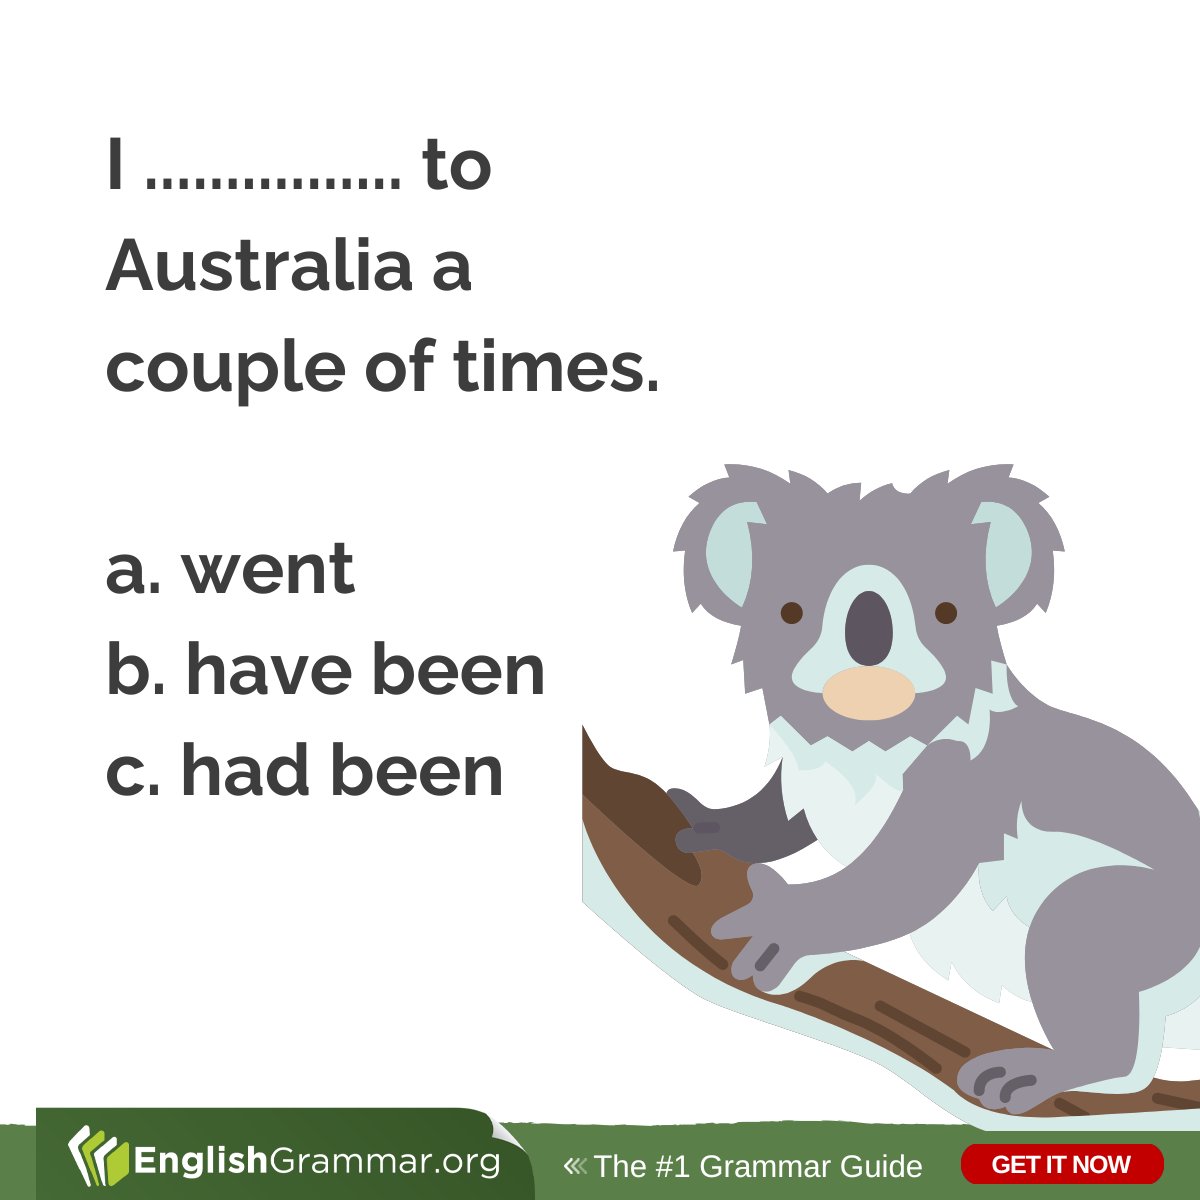 Anyone? Find the right answer here: englishgrammar.org/simple-vs-perf… #Englishgrammar #grammar #writing